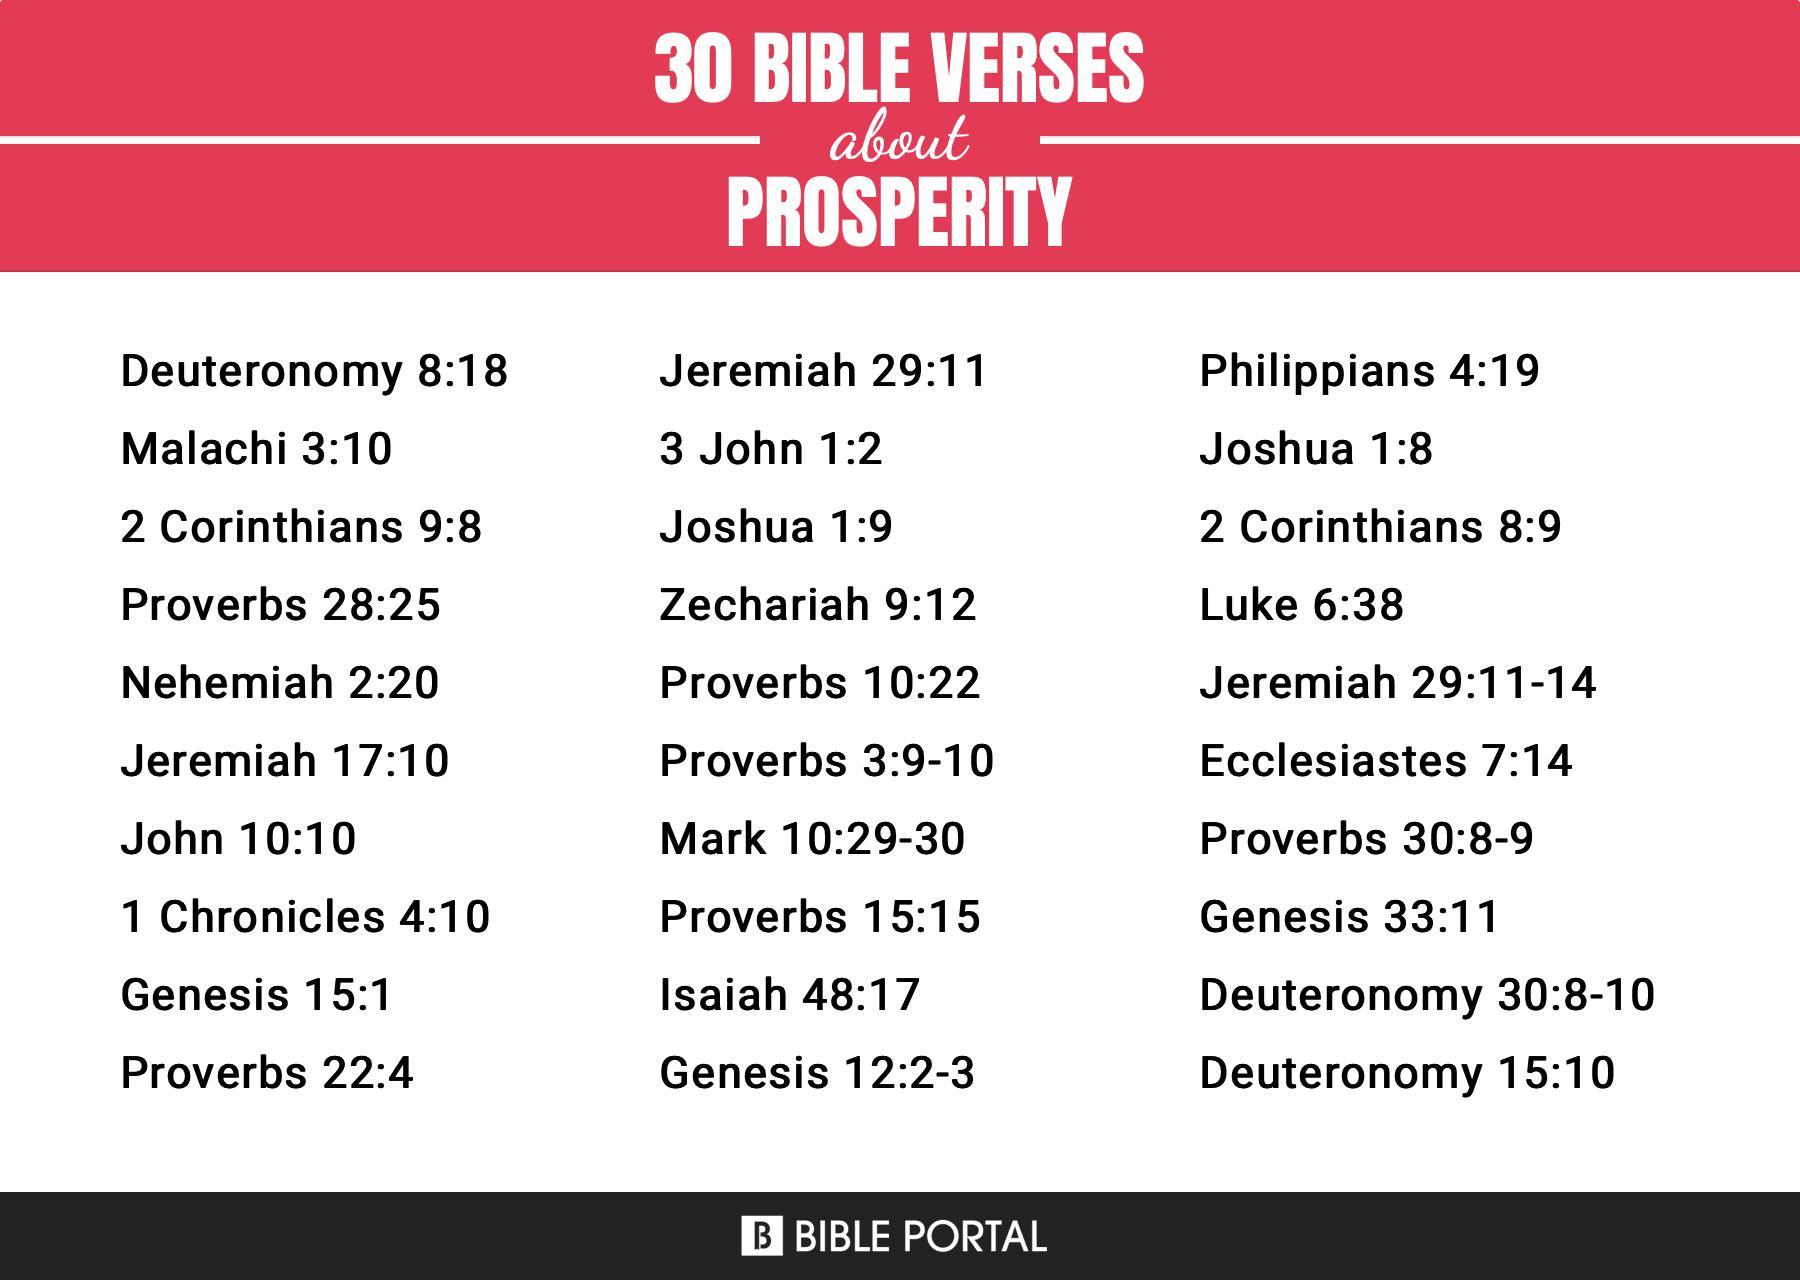 What Does the Bible Say about Prosperity?